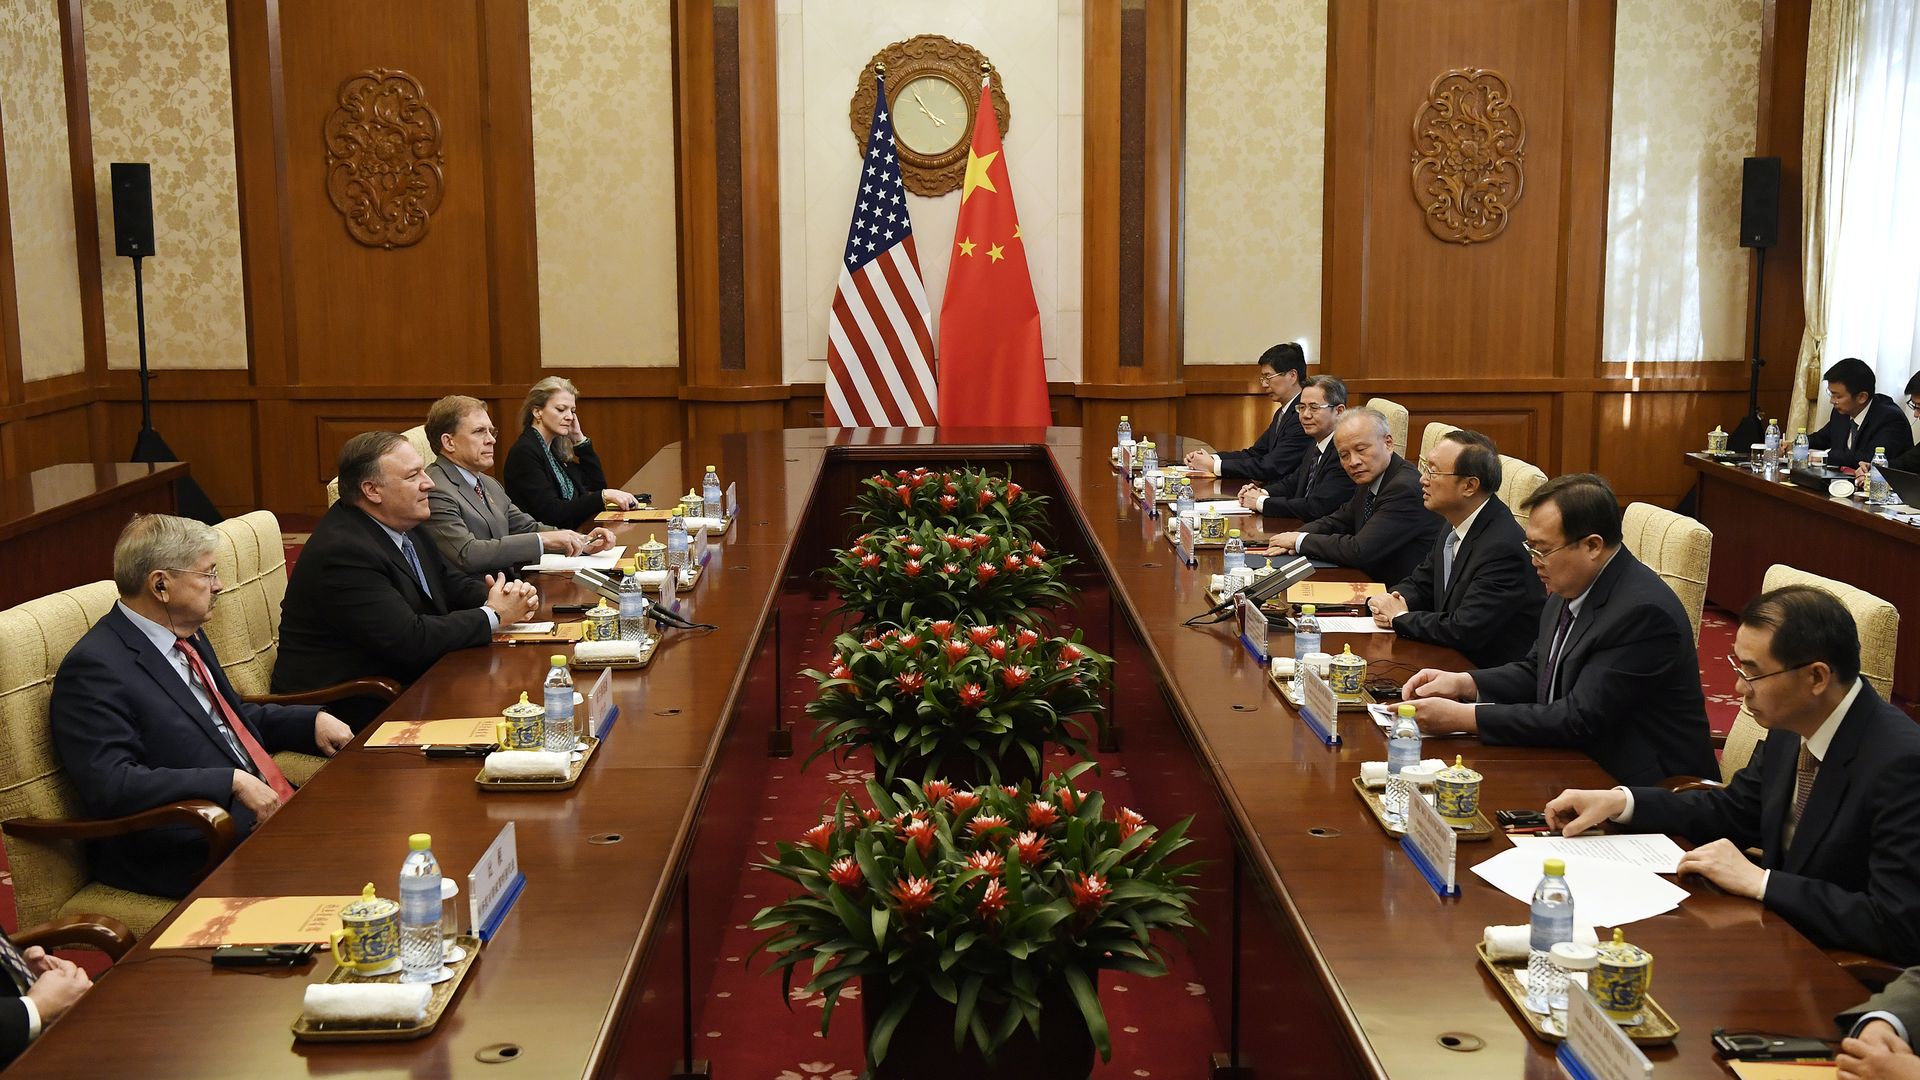 U.S. and Chinese delegations sit across from one another.